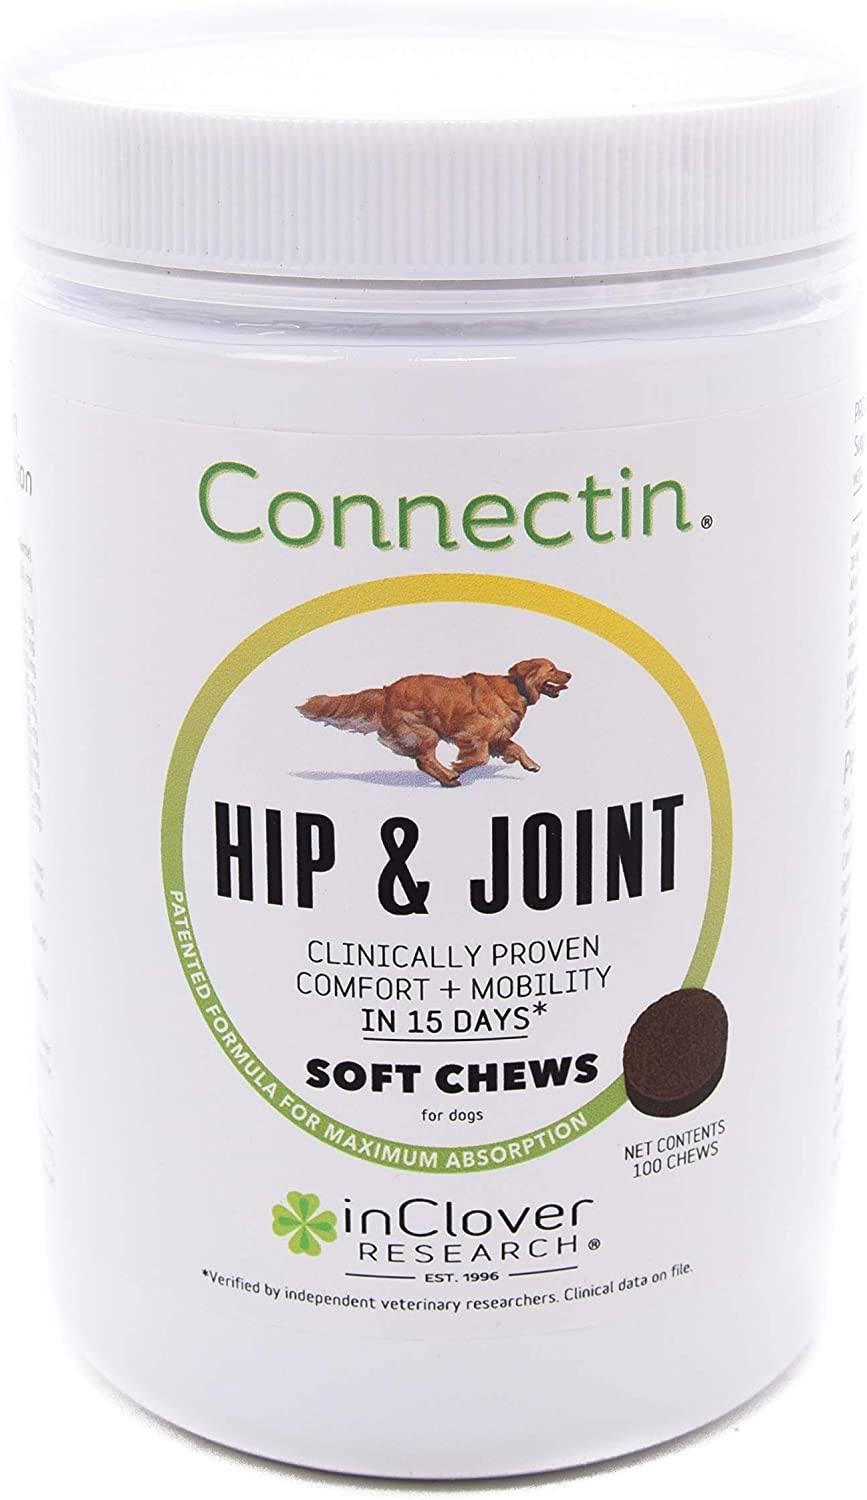 inClover Canine Connectin Hip and Joint Soft Chews 100ct